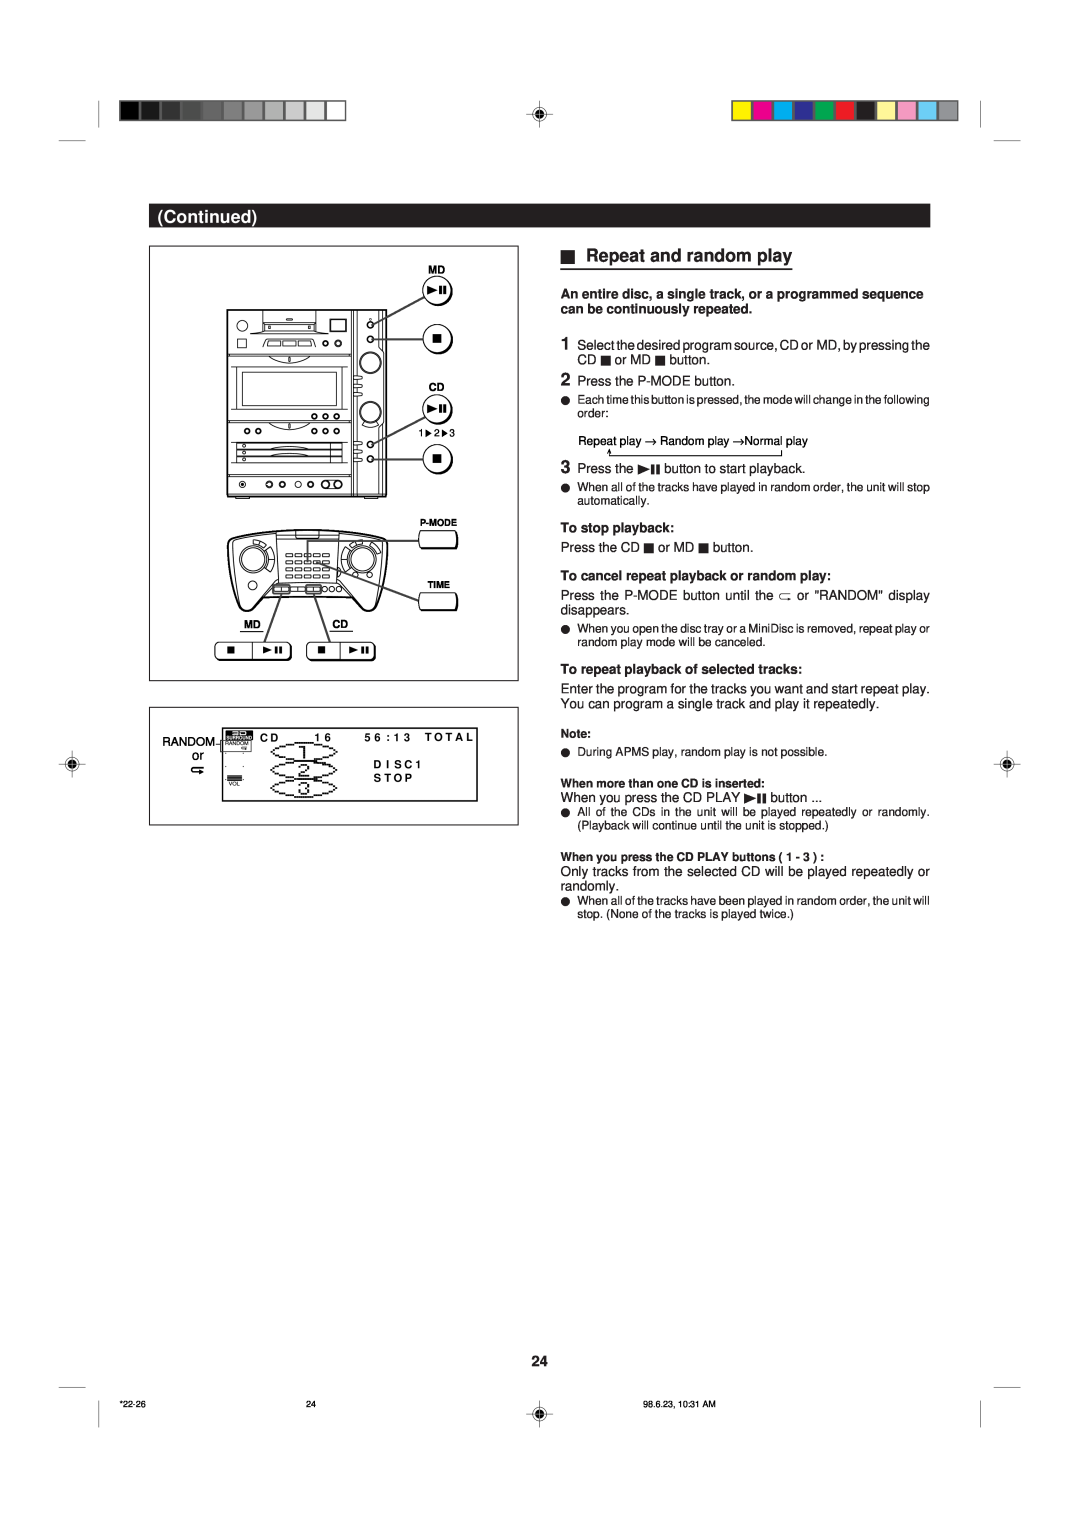 Sharp MD-X8 operation manual HRepeat and random play, Continued, To stop playback, To cancel repeat playback or random play 